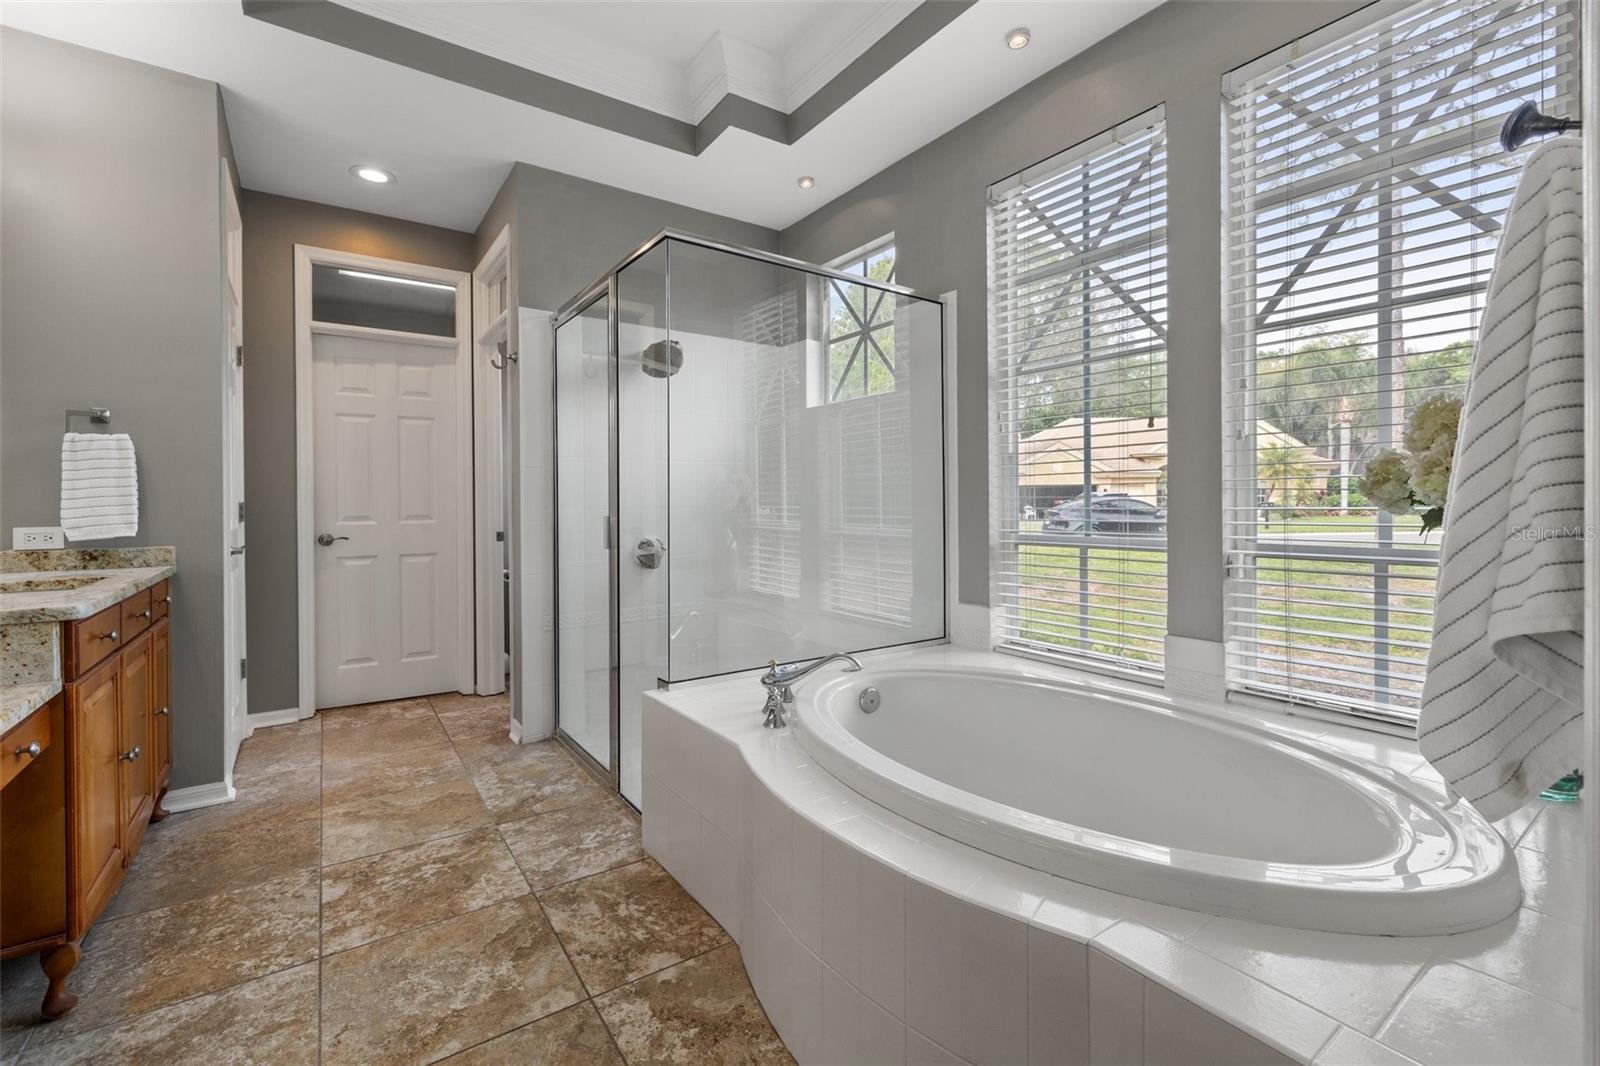 Primary Bathroom with Large Tub.